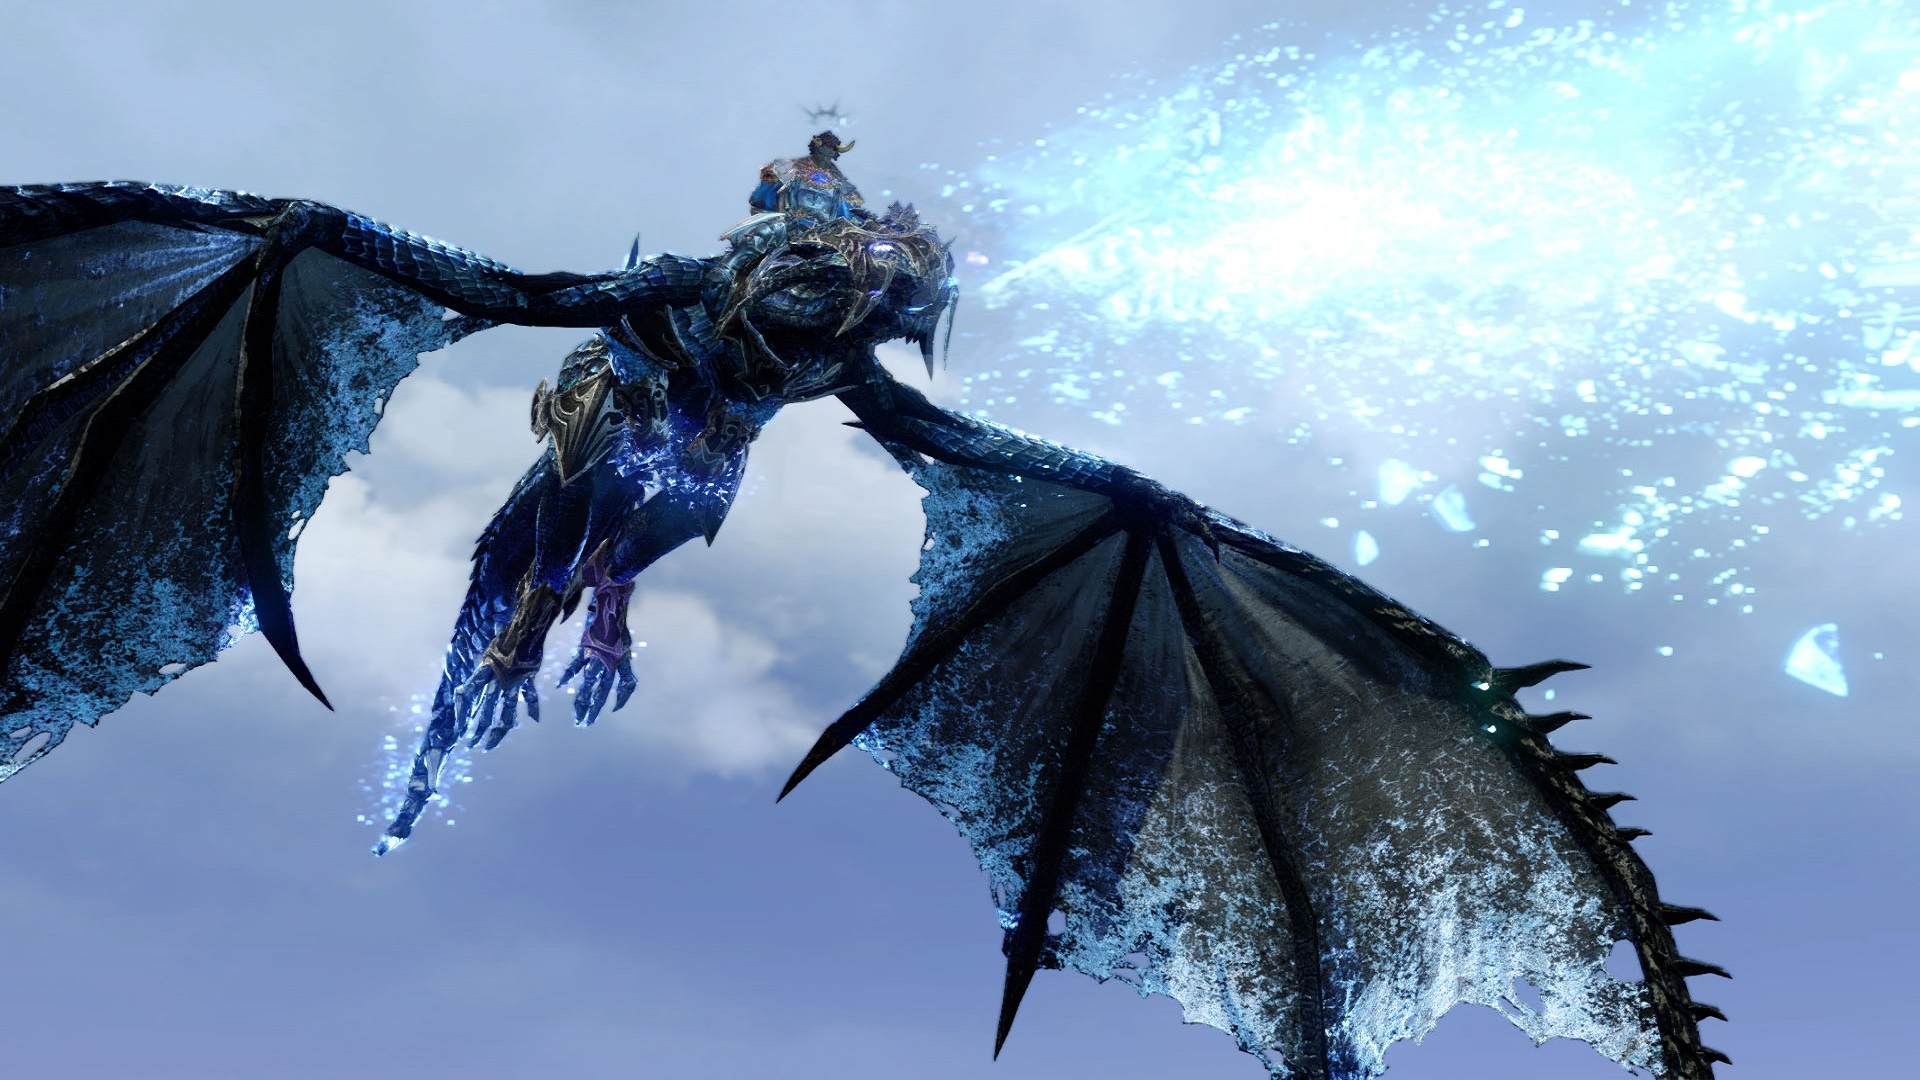 Best dragon games: ArcheAge. Image shows a dragon flying through the sky with a passenger on its back.